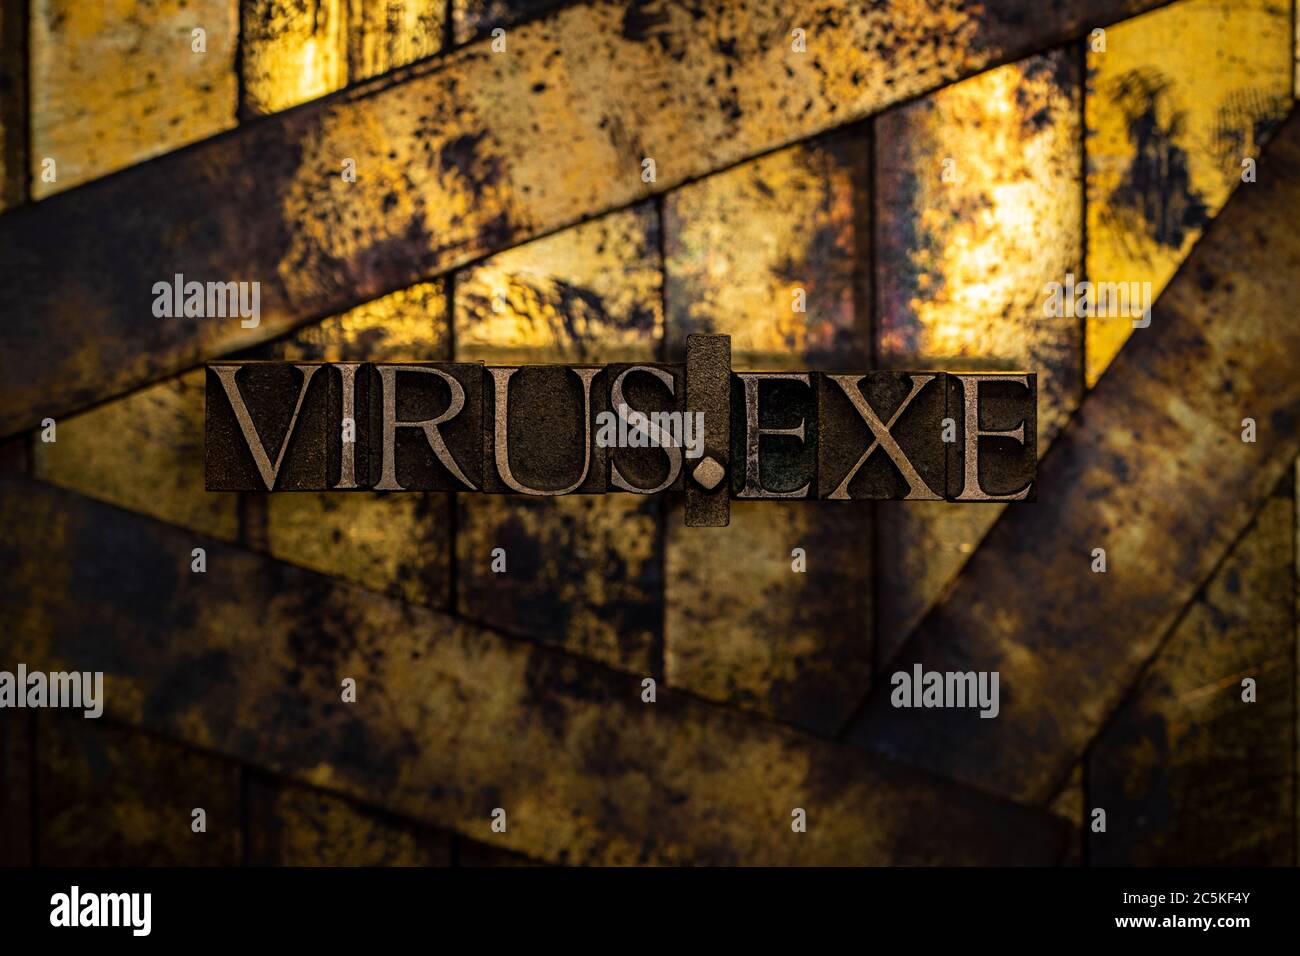 Virus.exe text formed with real authentic typeset letters on vintage textured silver grunge copper and gold background Stock Photo